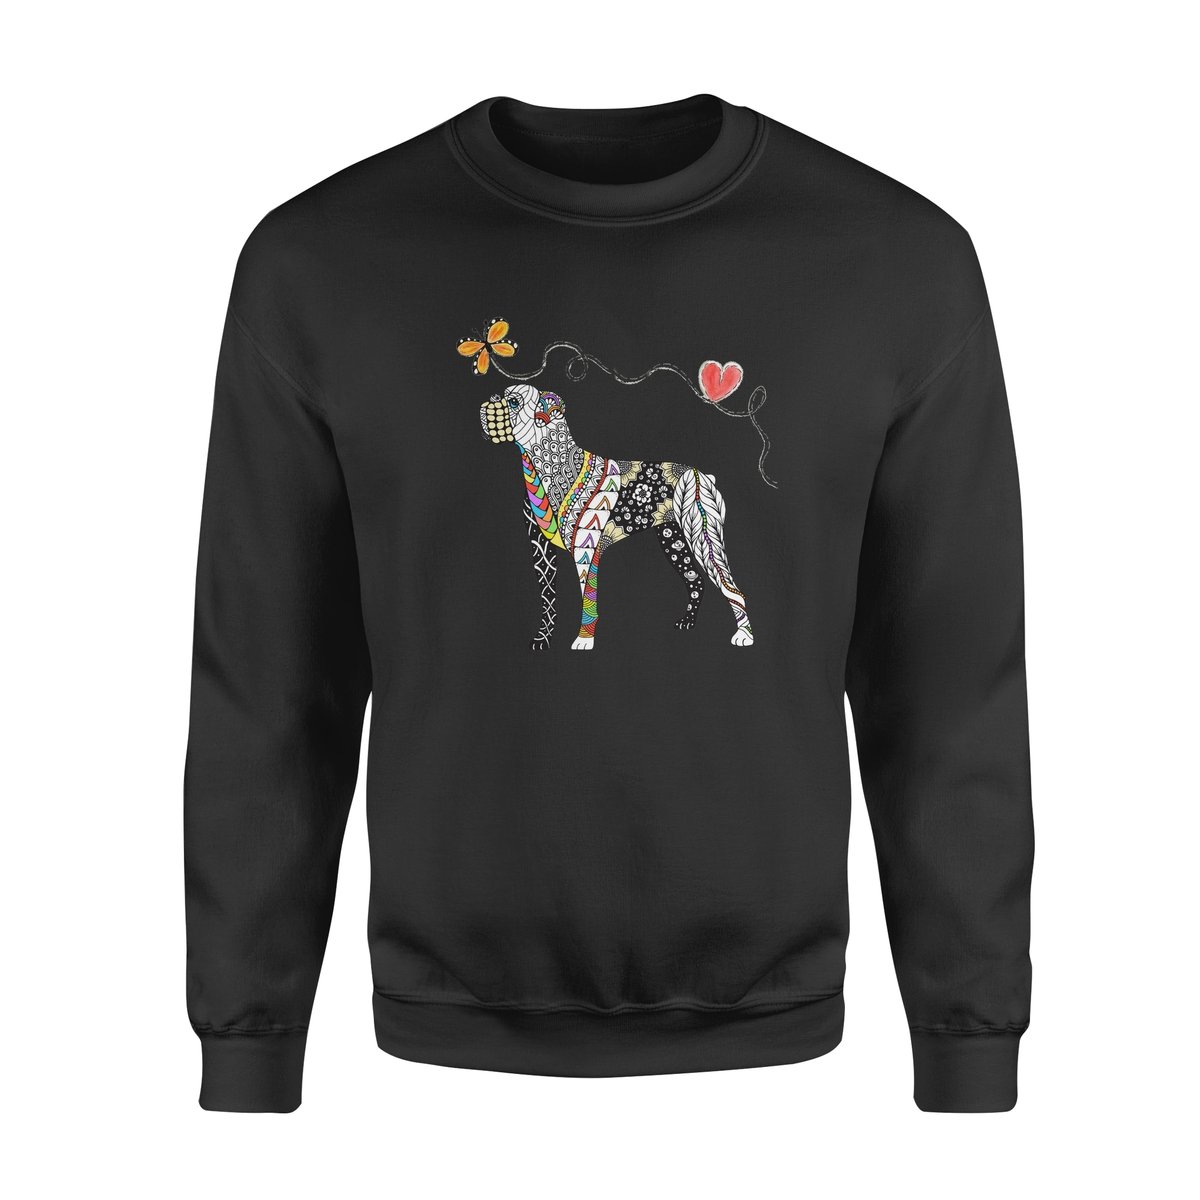 Zentangle Rainbow Boxer – Standard Crew Neck Sweatshirt, Gift For Dog Lover, Gift For Bull Terrier Lover T-Shirt Hoodie All Color Size S-5Xl